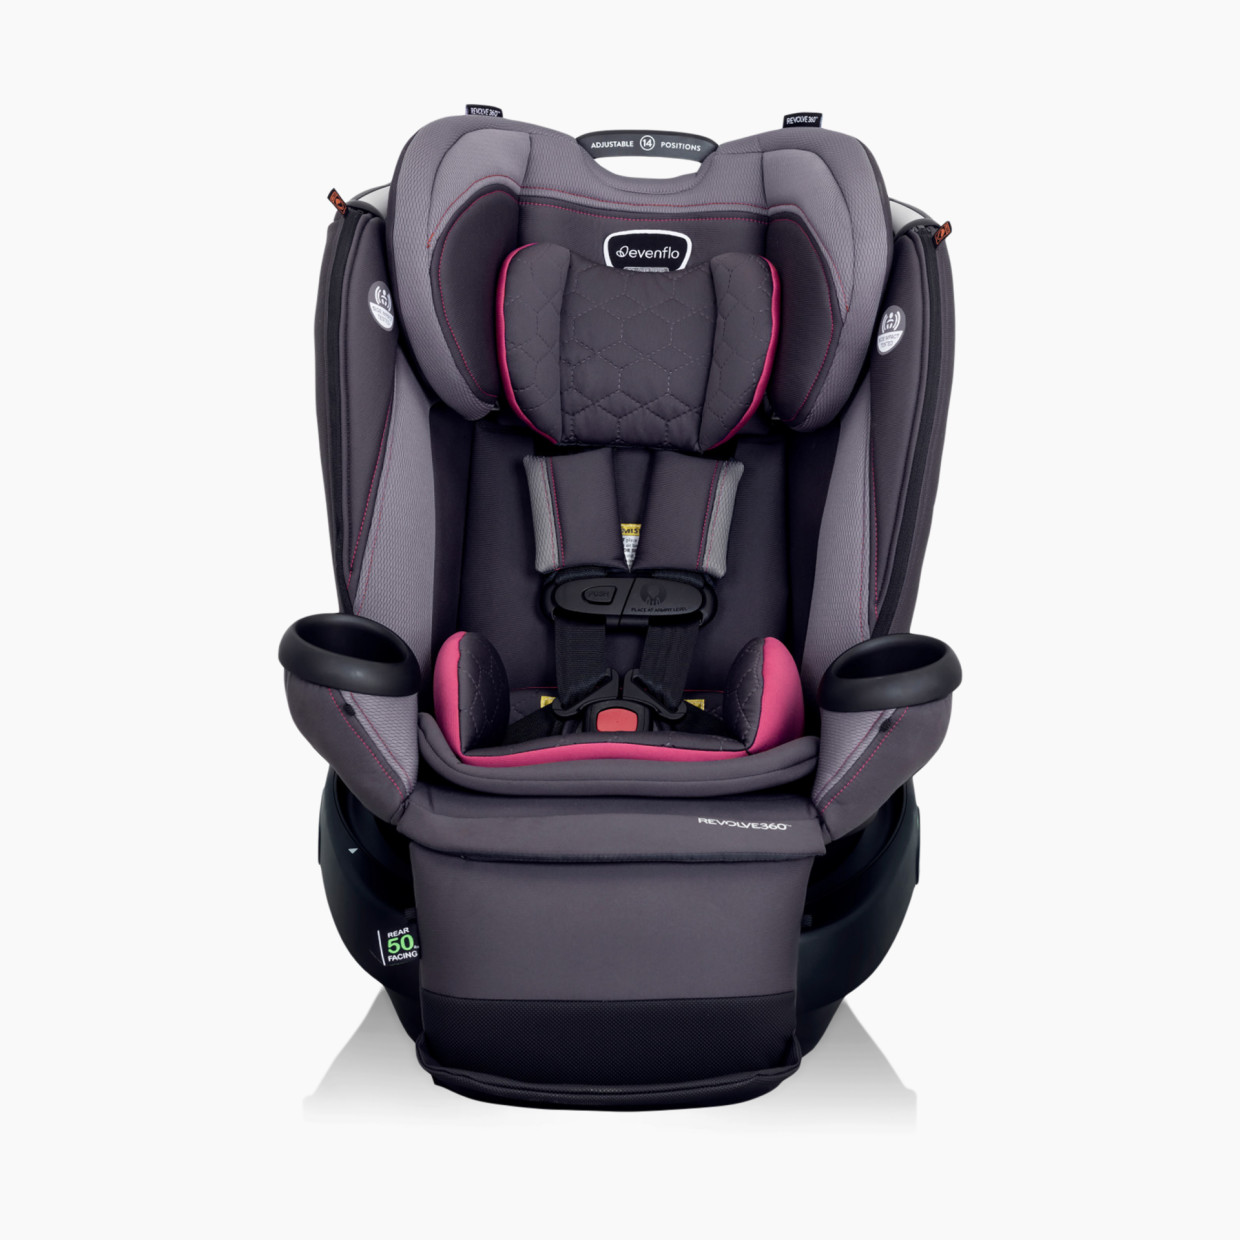 Evenflo Revolve360 Extend All-in-One Rotational Convertible Car Seat - Rowe.